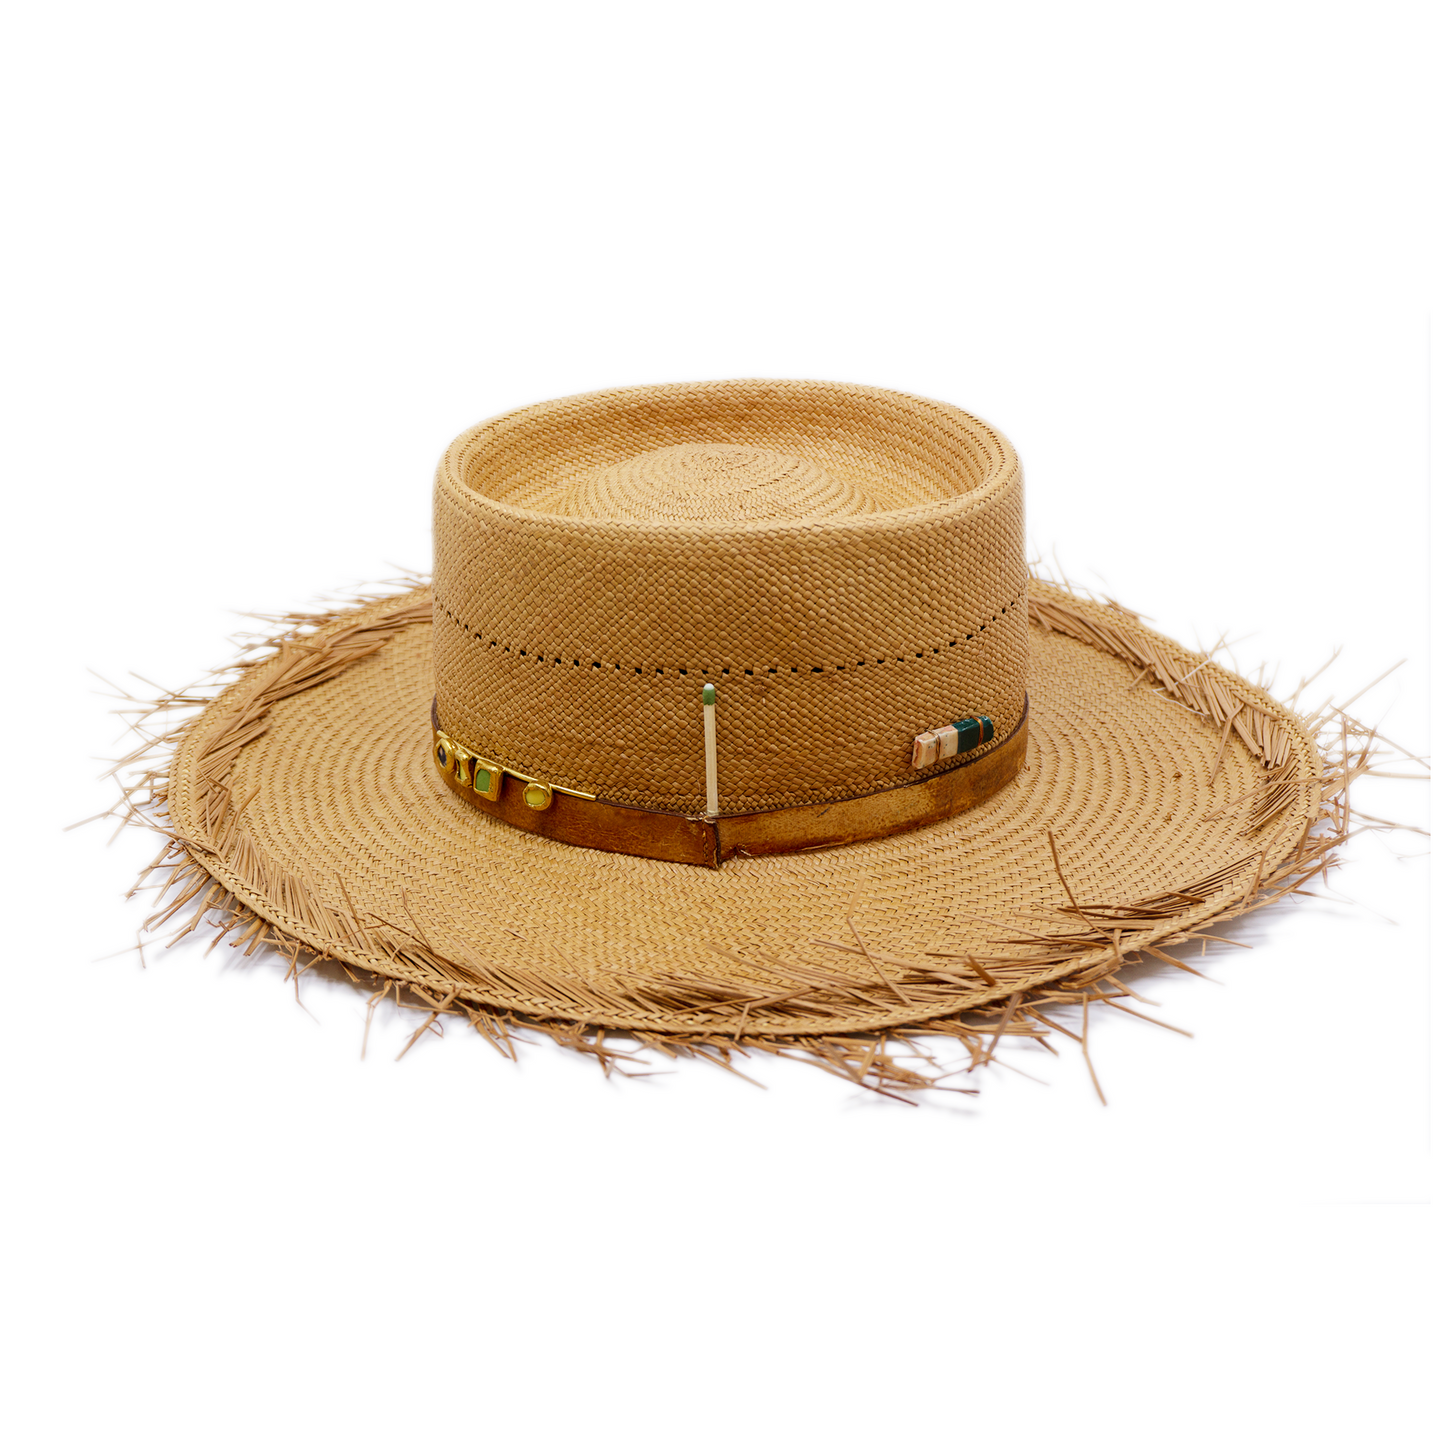 100% Ecuadorian straw in Natural   ¾” Reishi leather band  NF Gold plated ceramic broach &   button   Woven in Ecuador  Natural brim  Made in USA